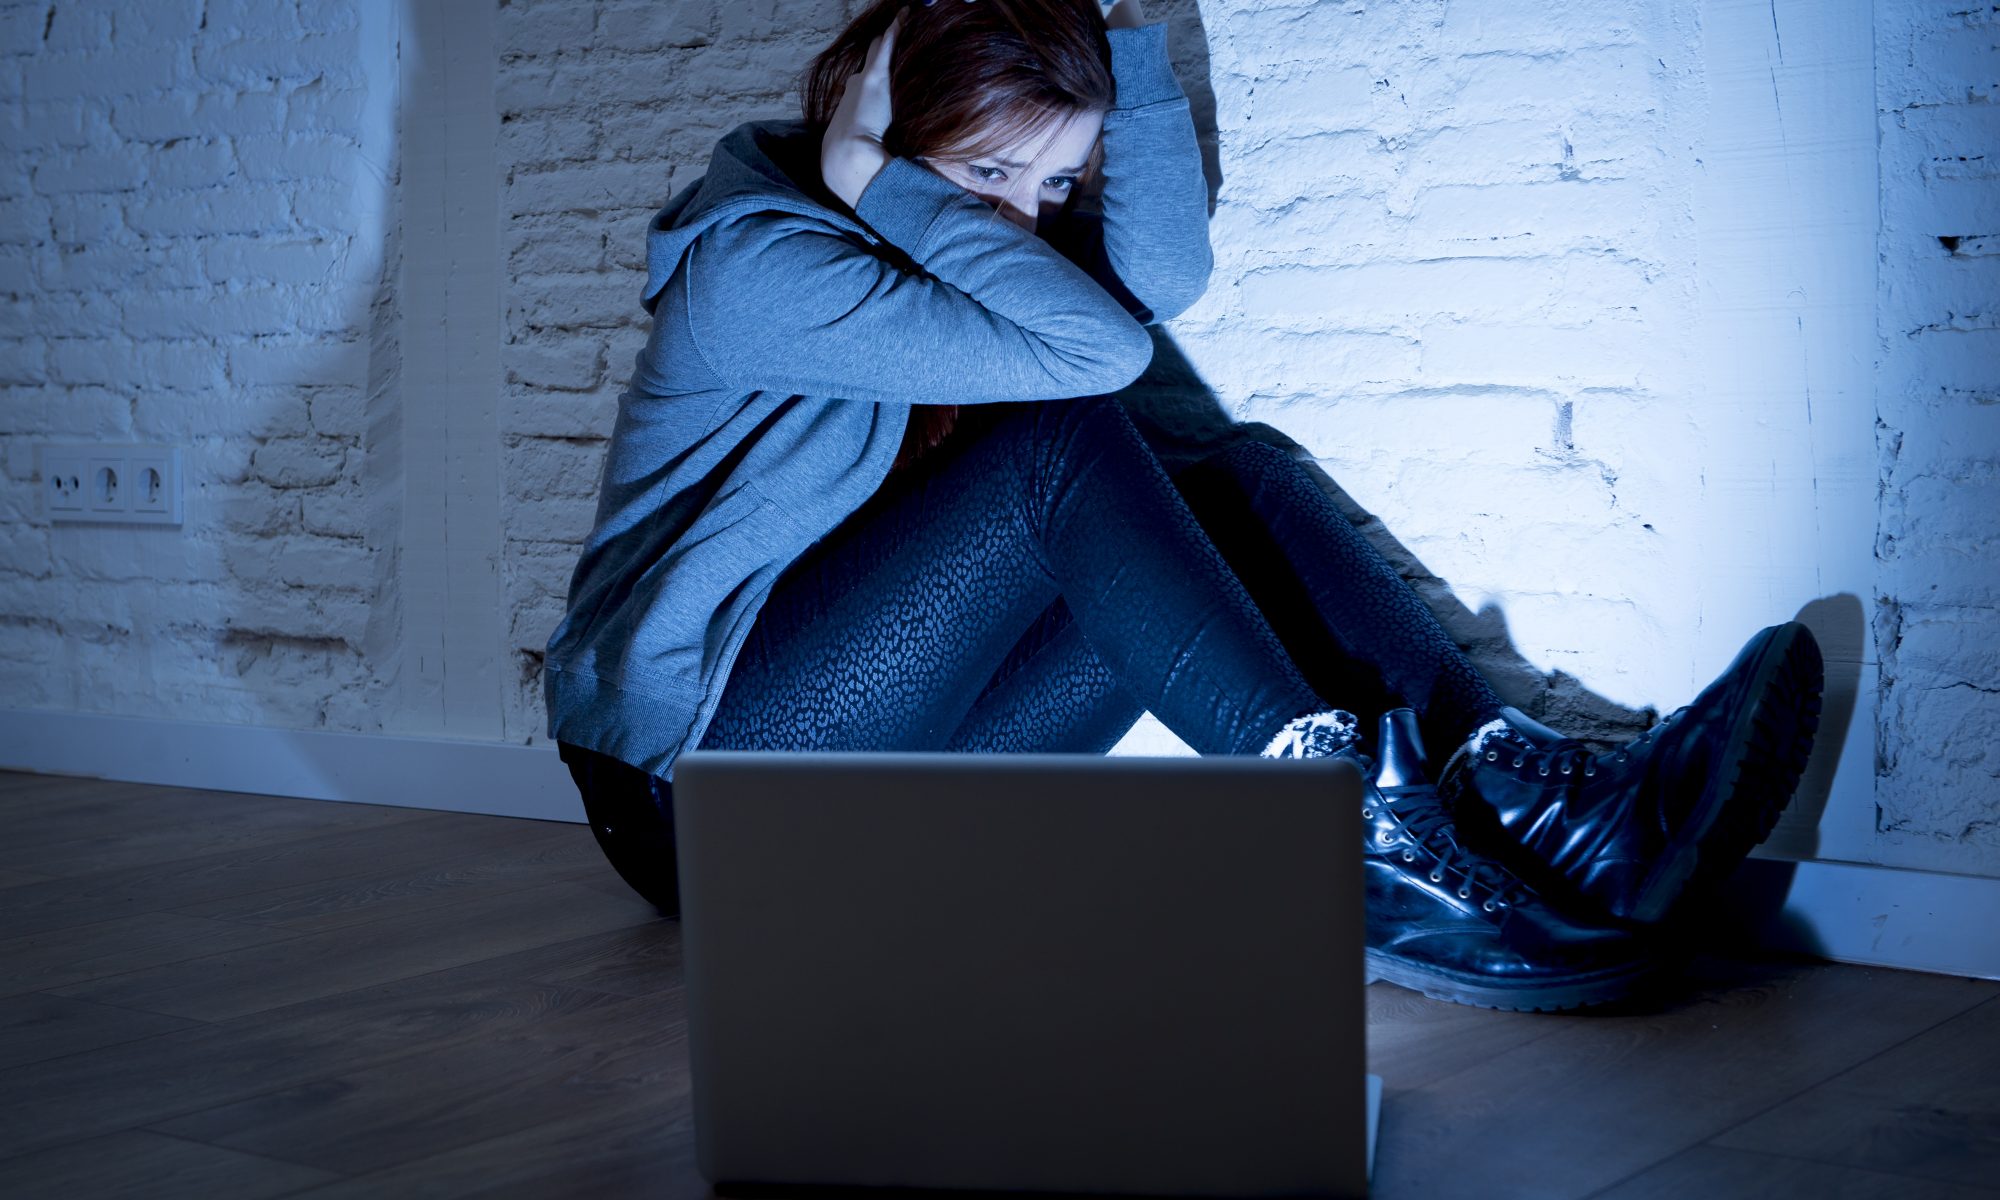 sad and scared female teenager with computer laptop suffering cyberbullying and harassment being online abused by stalker or gossip feeling desperate and humiliated in cyber bullying concept